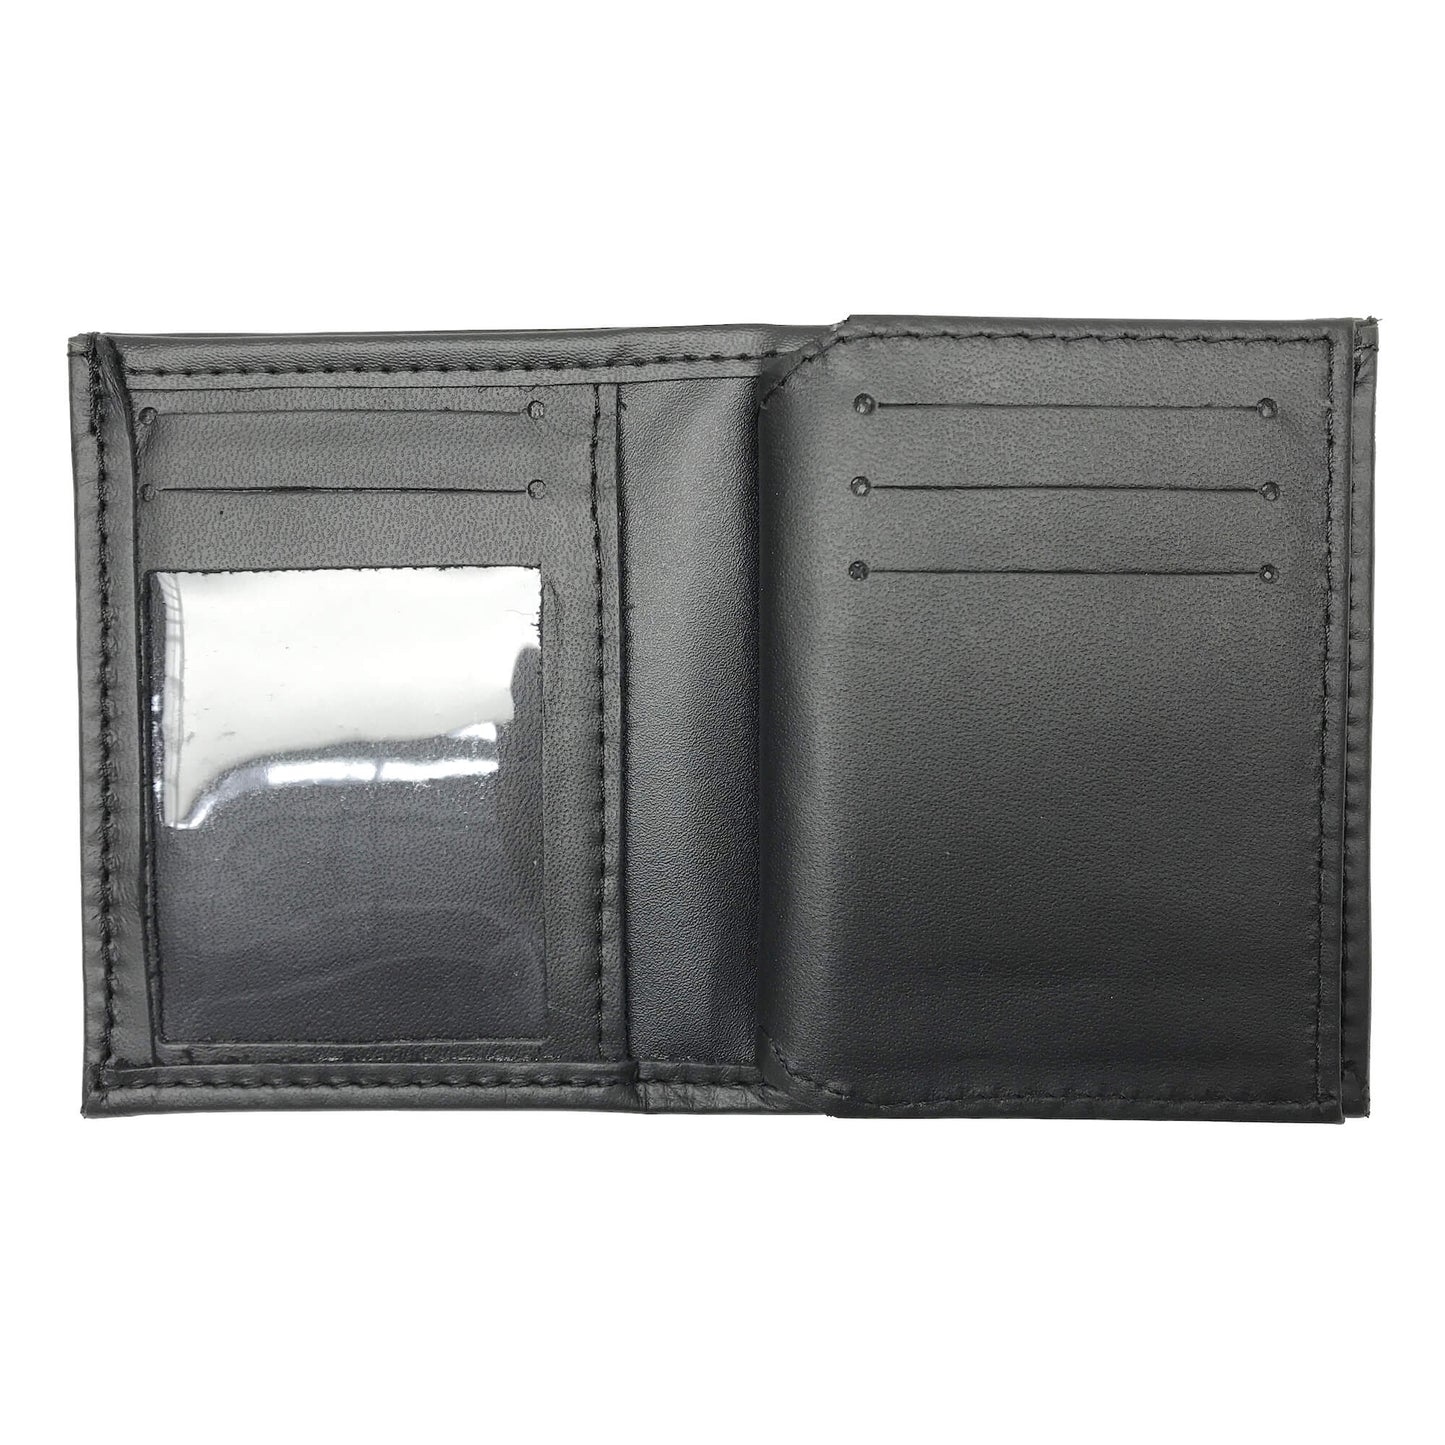 Florida Department of Corrections (DOC) Bifold Hidden LARGE Badge Wallet-Perfect Fit-911 Duty Gear USA